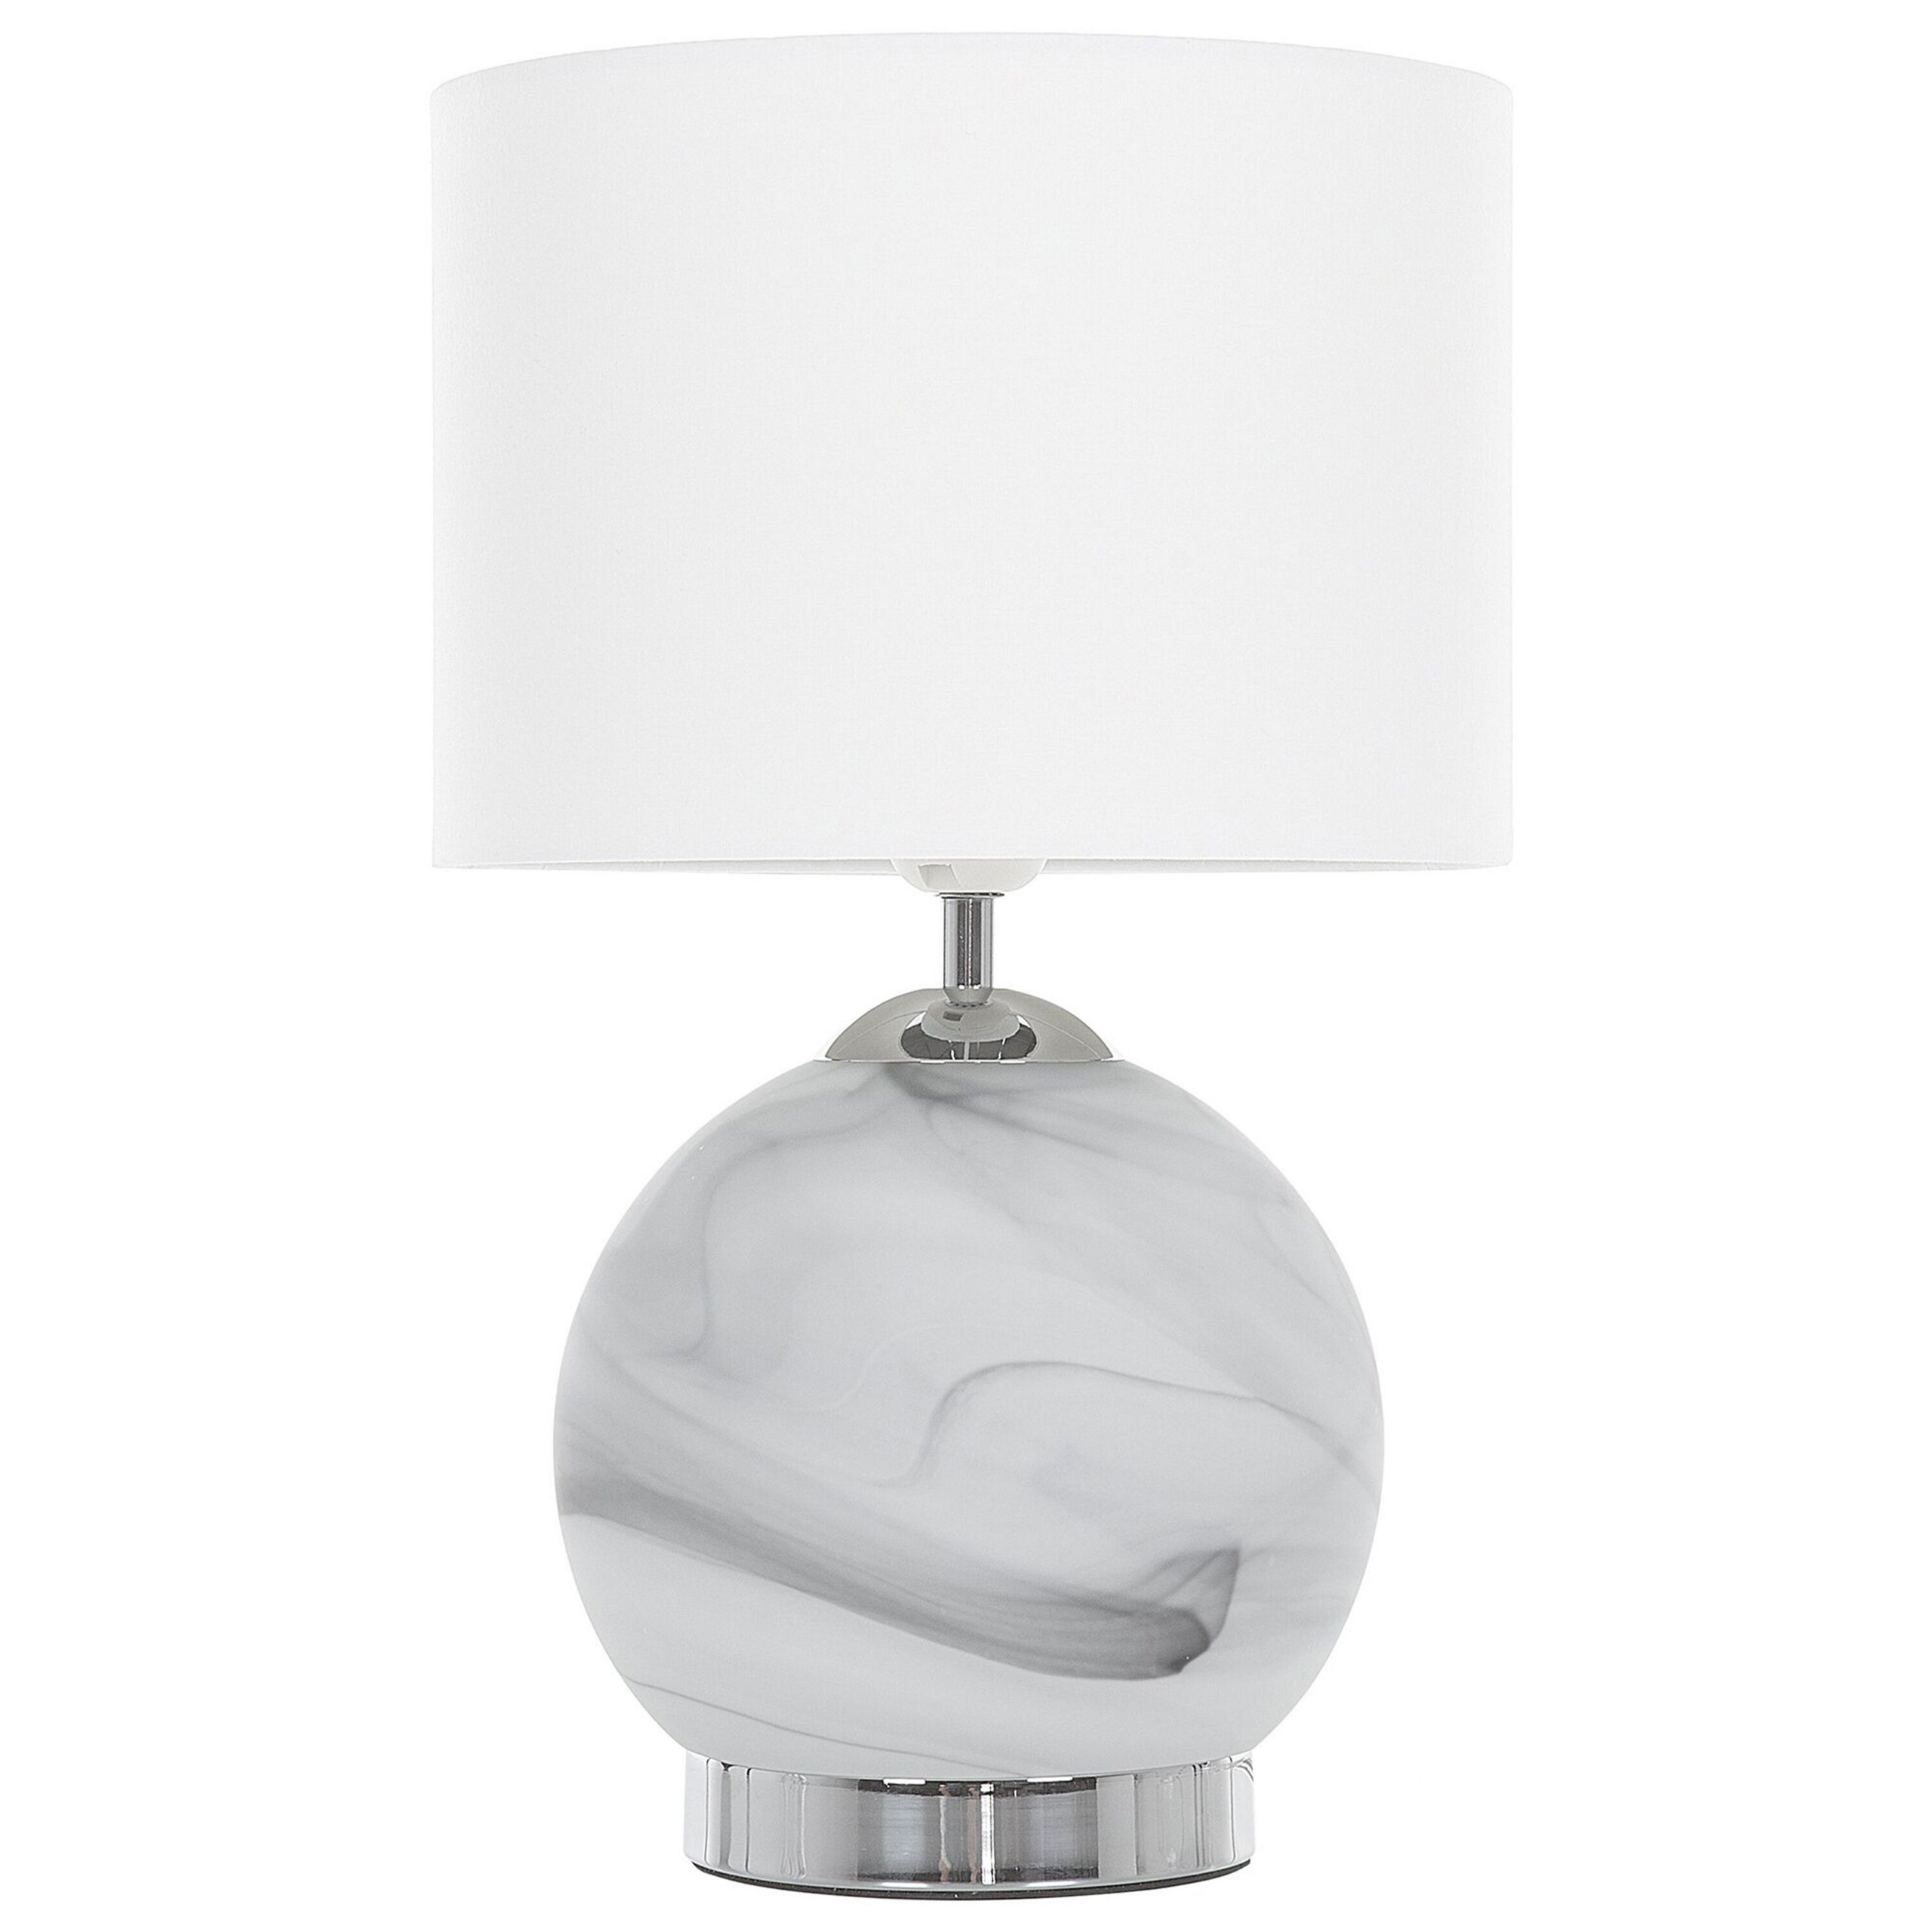 Beliani Bedside Table Lamp Silver Round Base White Drum Shade